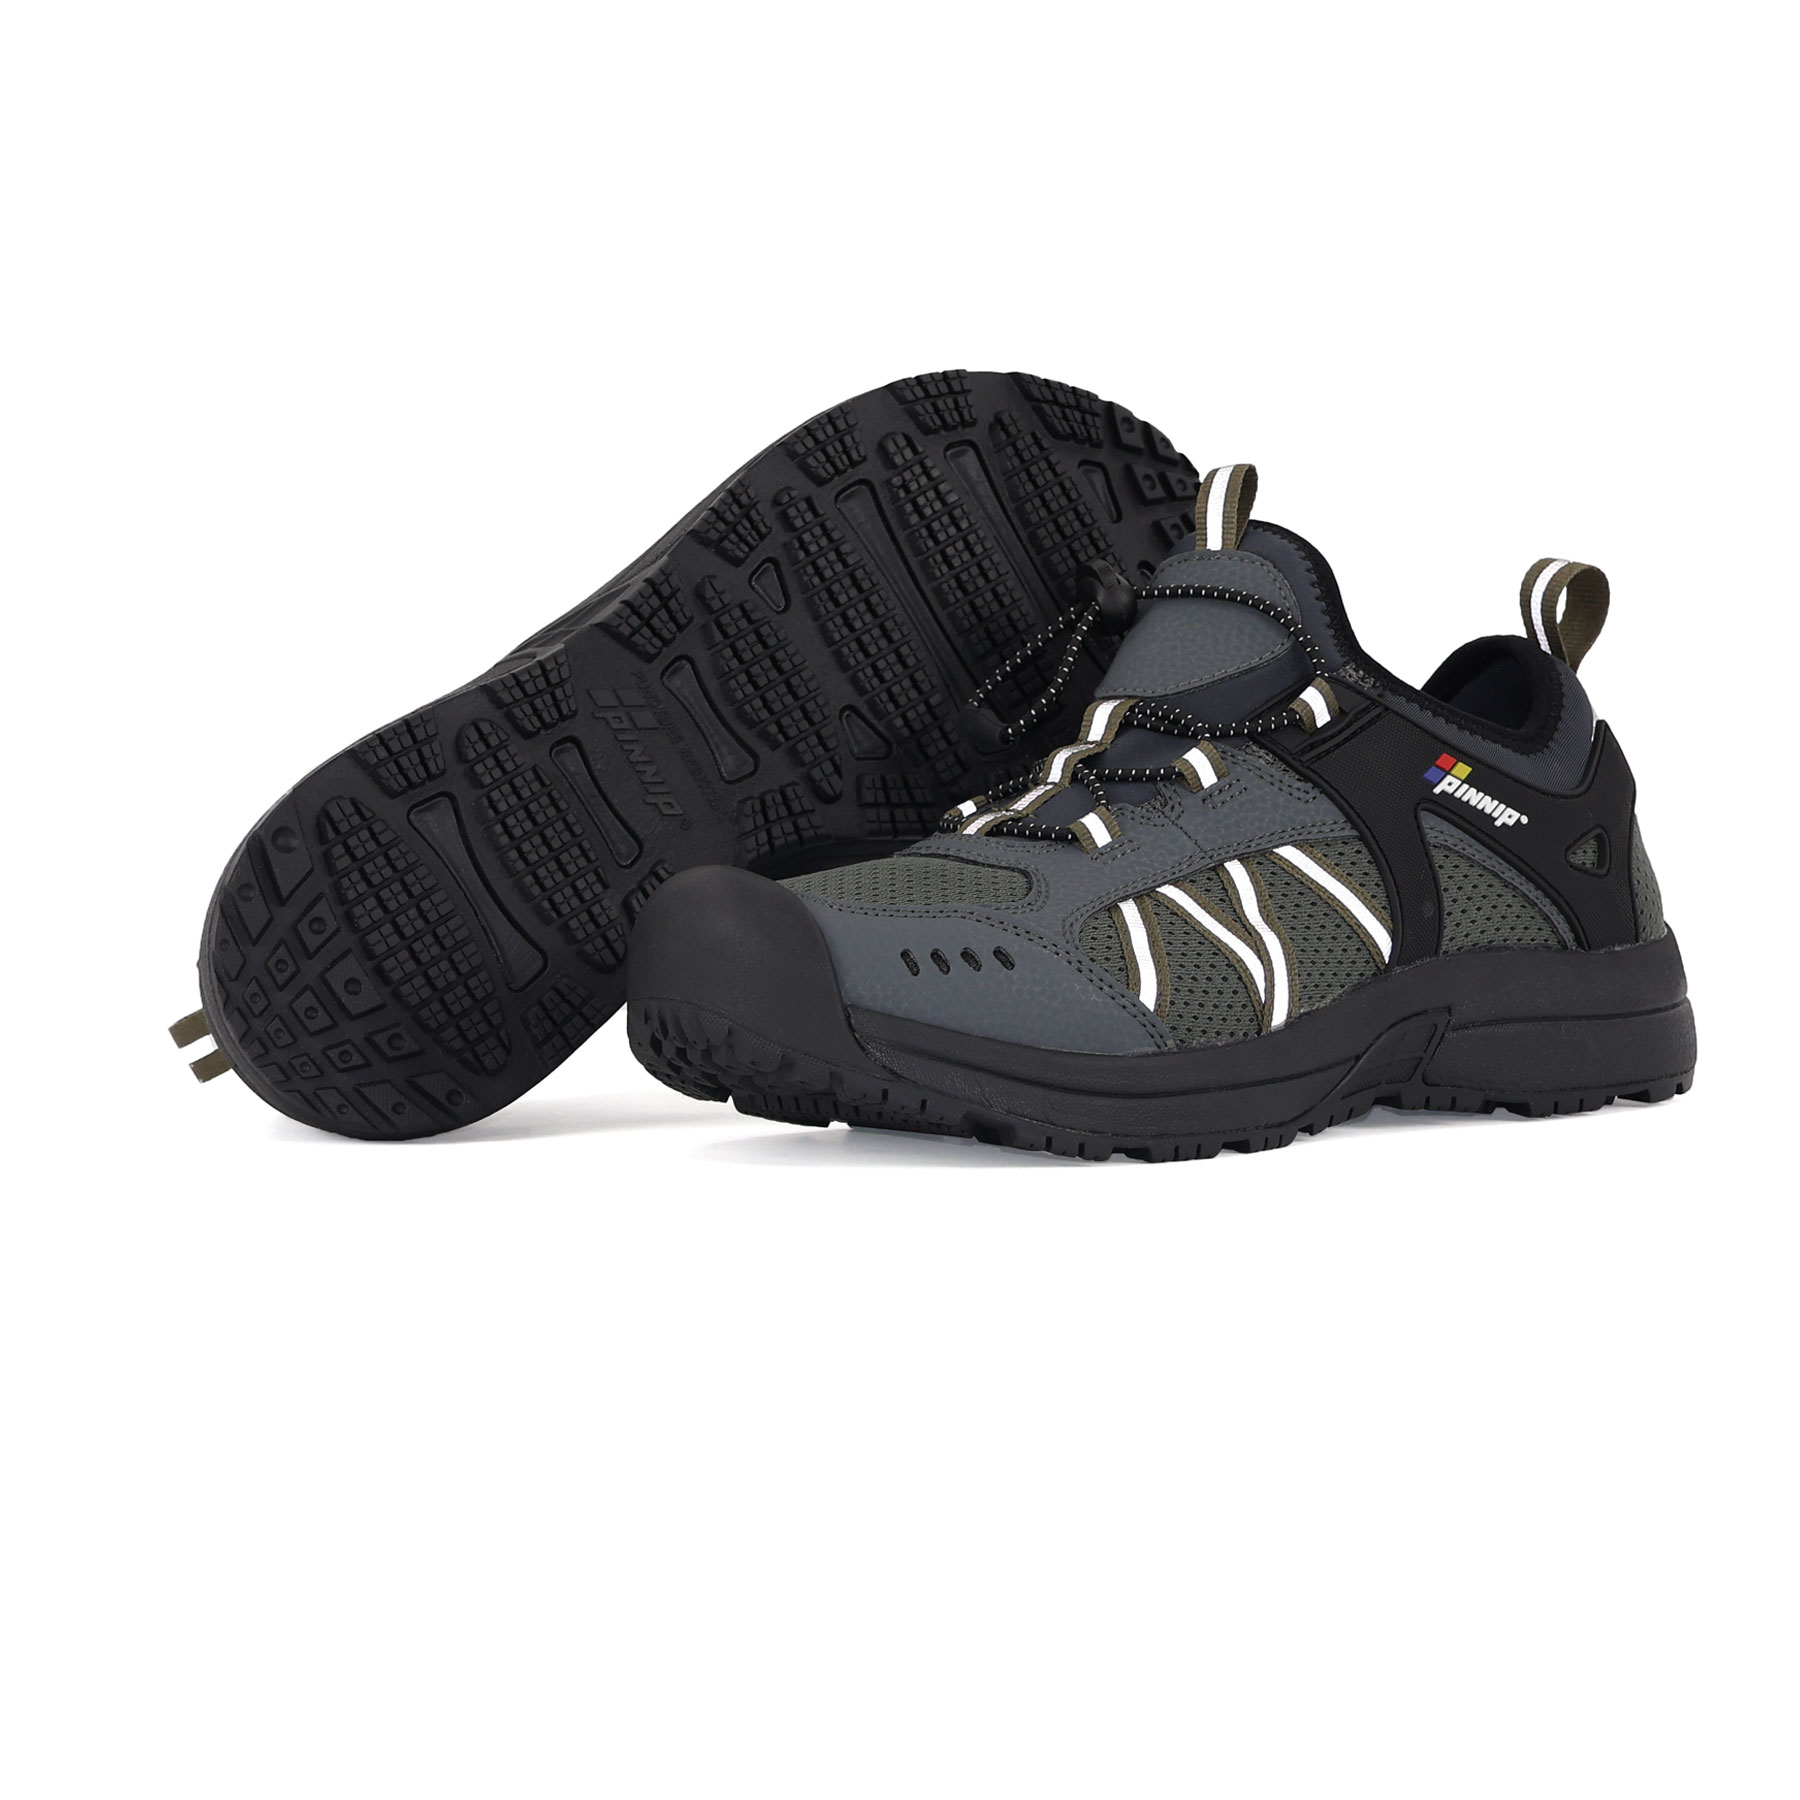 A black PINNIP puncture resistance hiking shoe with an EVA insole, puncture-resistant midsole fabric and rubber outsole